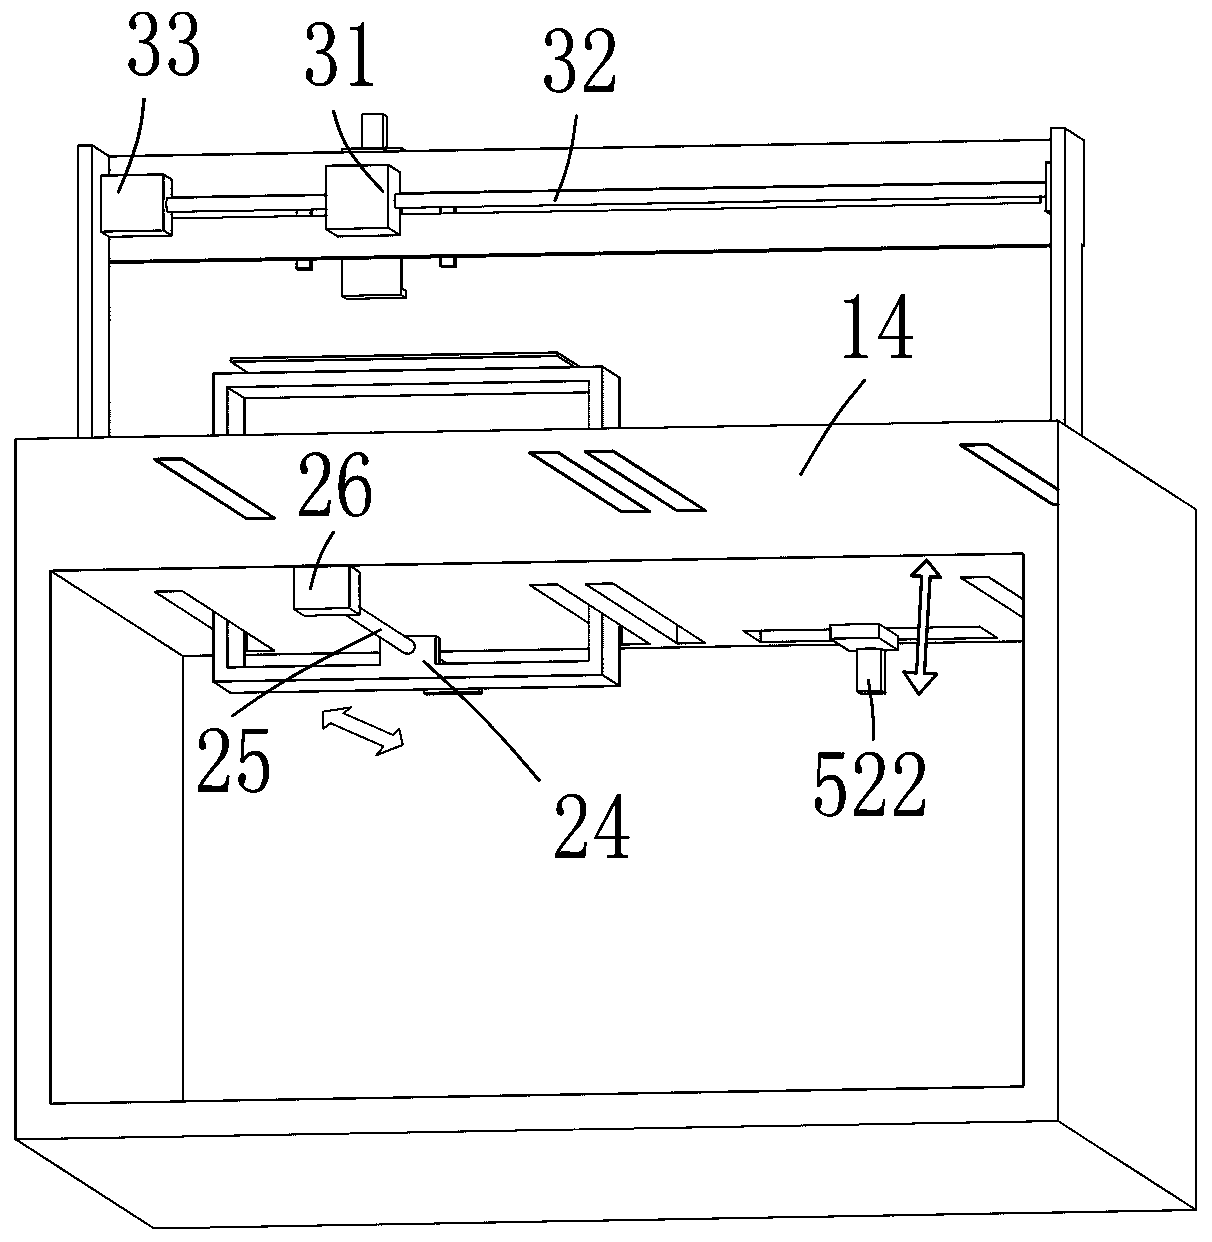 Full lamination device and method suitable for large size touch screen (G+G)